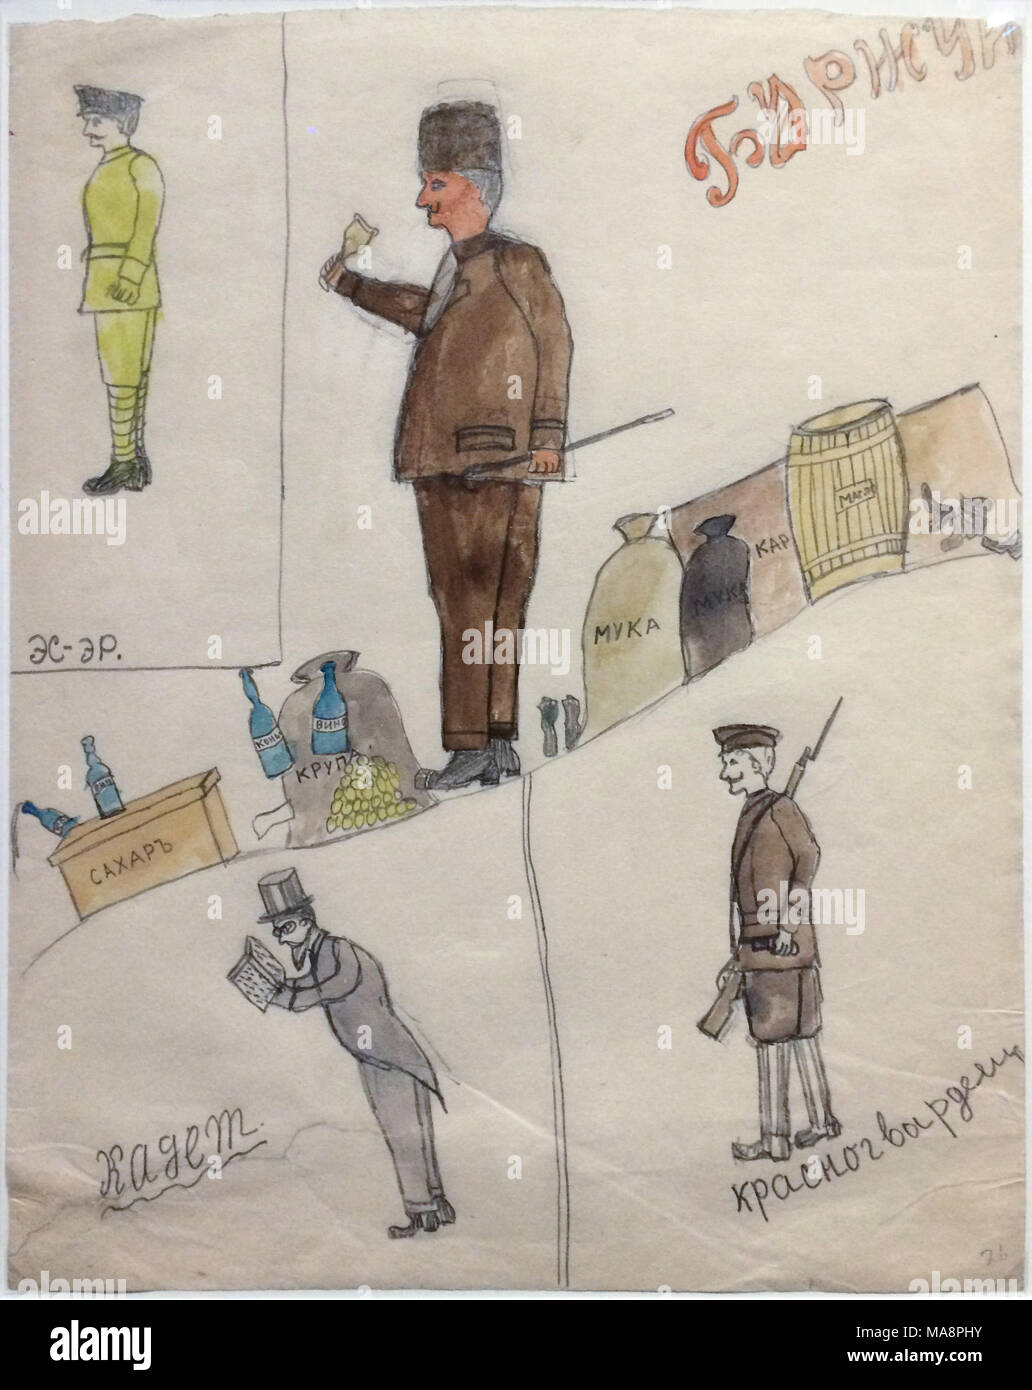 Child's drawing from the time of the Russian Revolution (1917). A member of the Socialist Revolutionary Party, a bourgeois, a member of the Constitutional Democratic Party (Kadet) and a member of the Red Guard are depicted in the drawing. Stock Photo